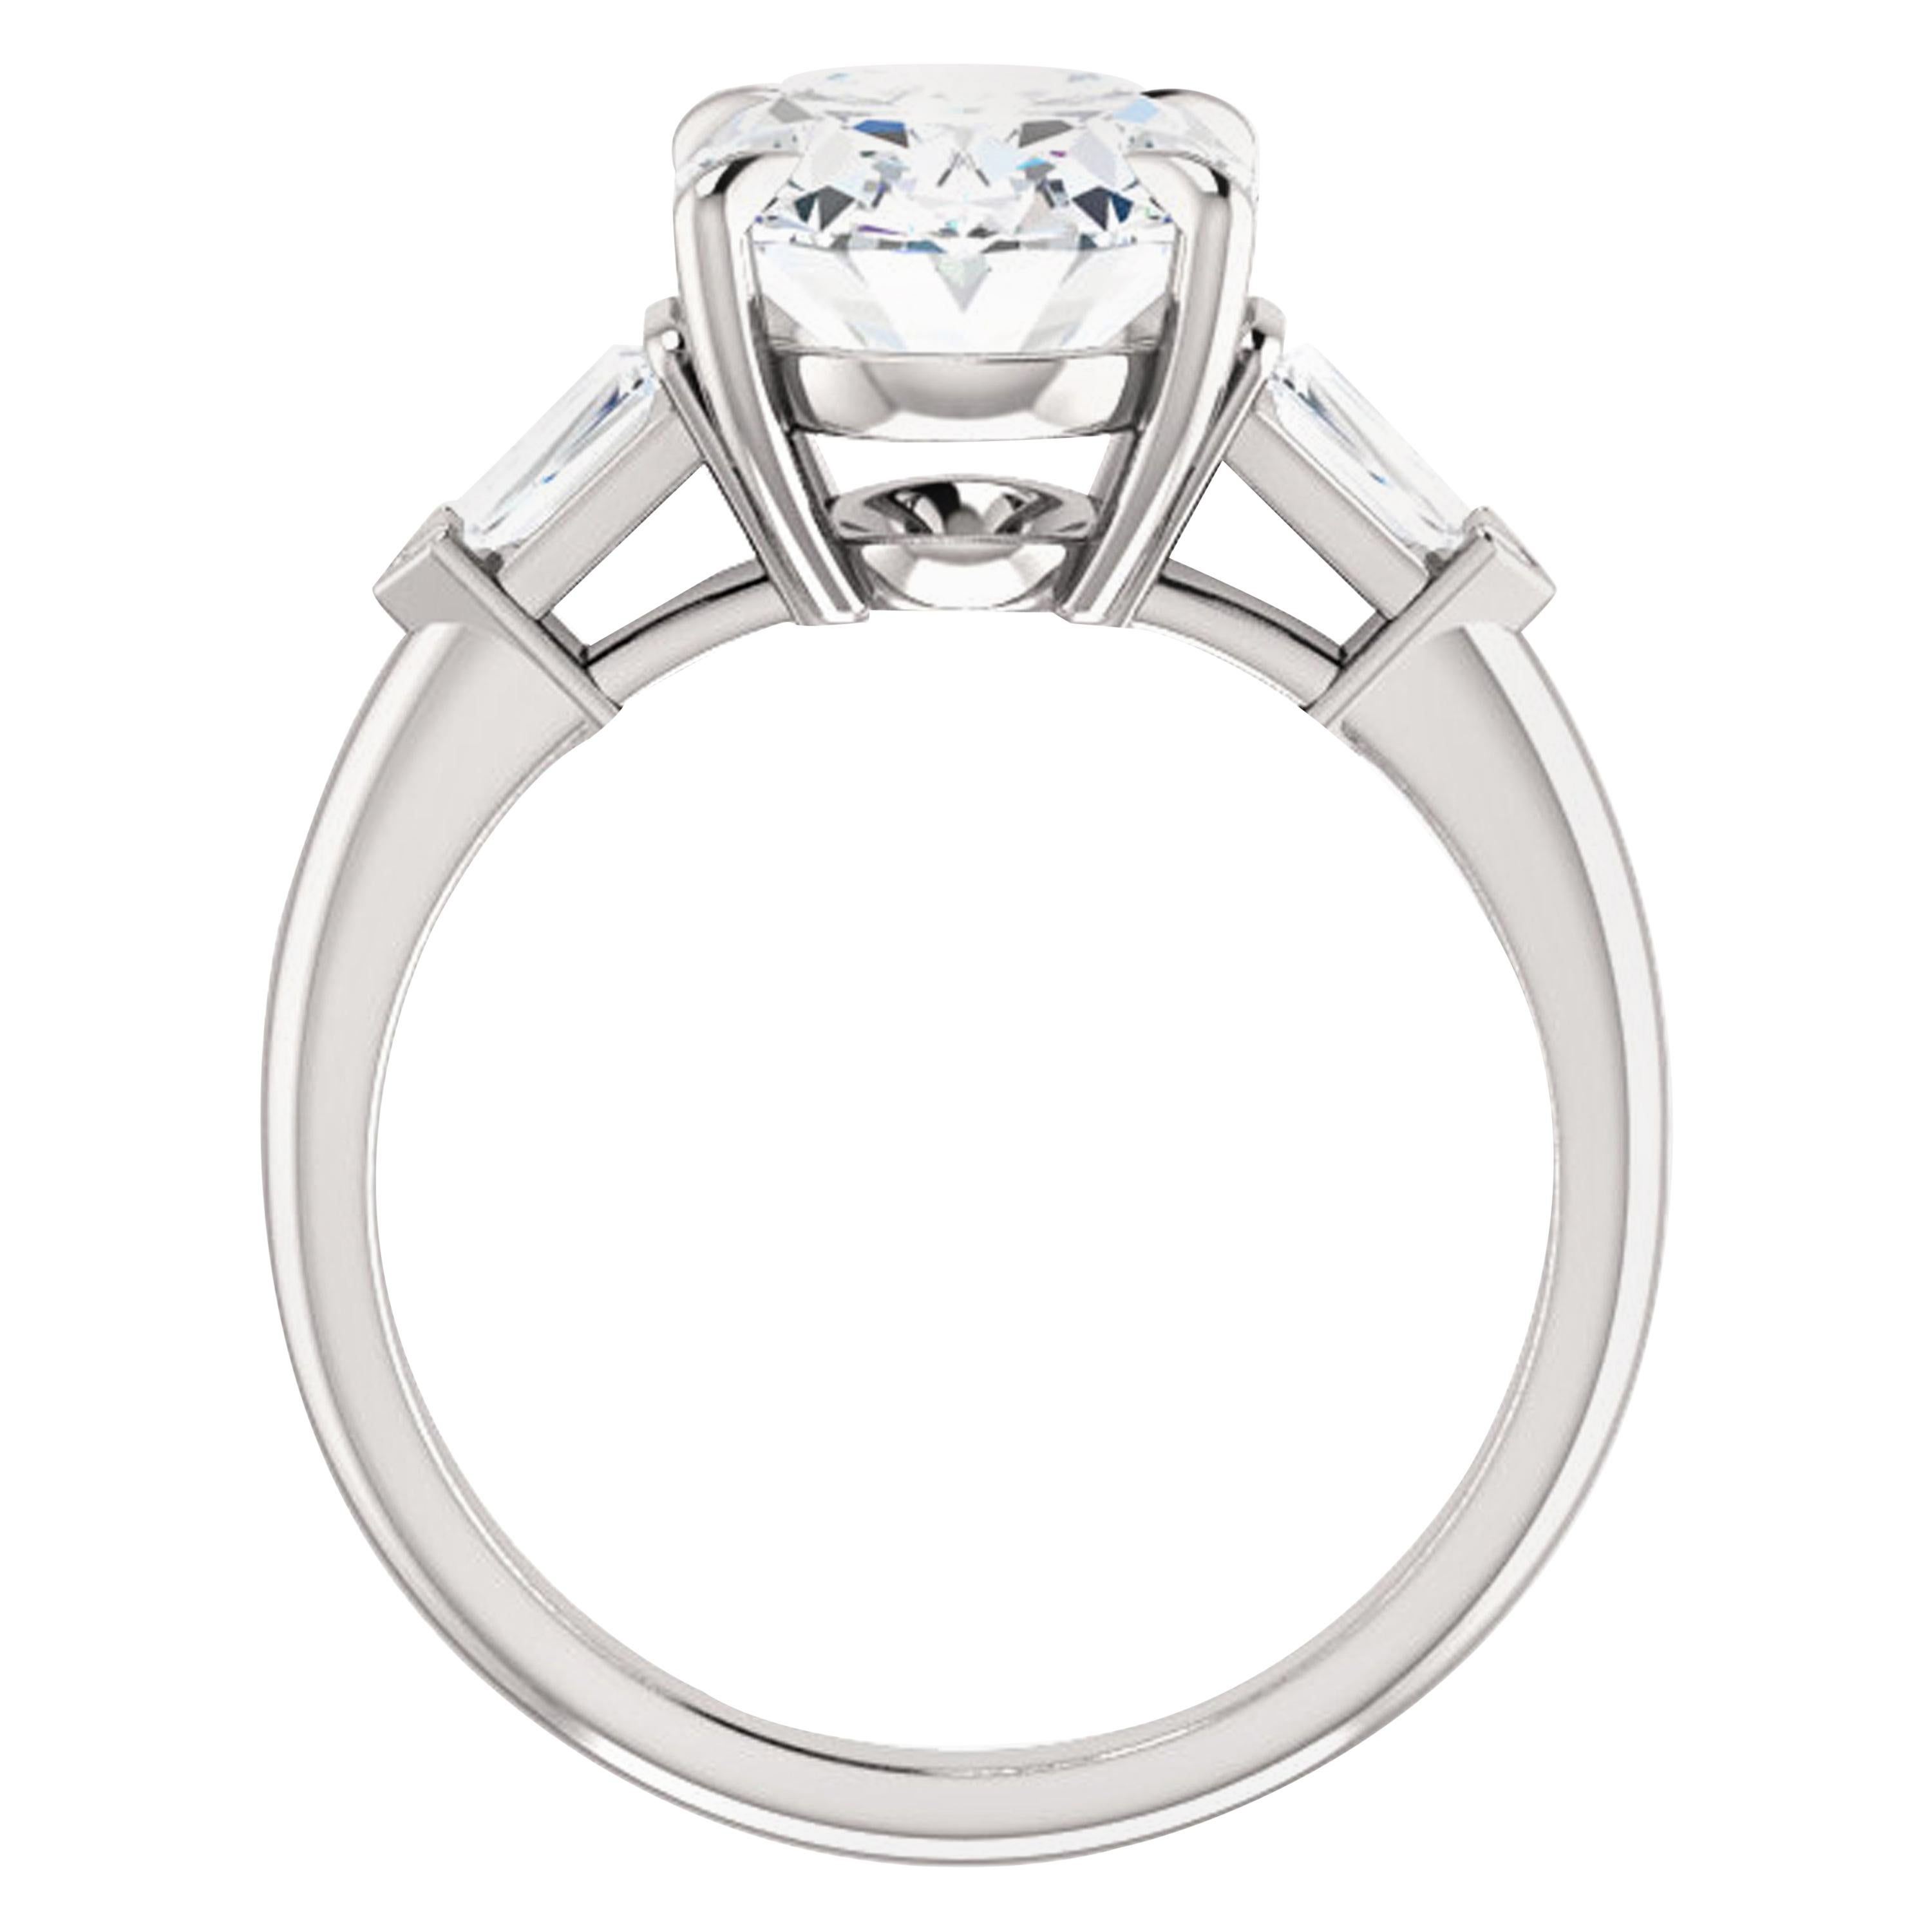 Featuring a cathedral style, the arches of this engagement ring rise up and add extra height to the GIA certified center diamond. Diligently crafted in your metal of choice, this wedding ring is finished with a high polish for luxurious